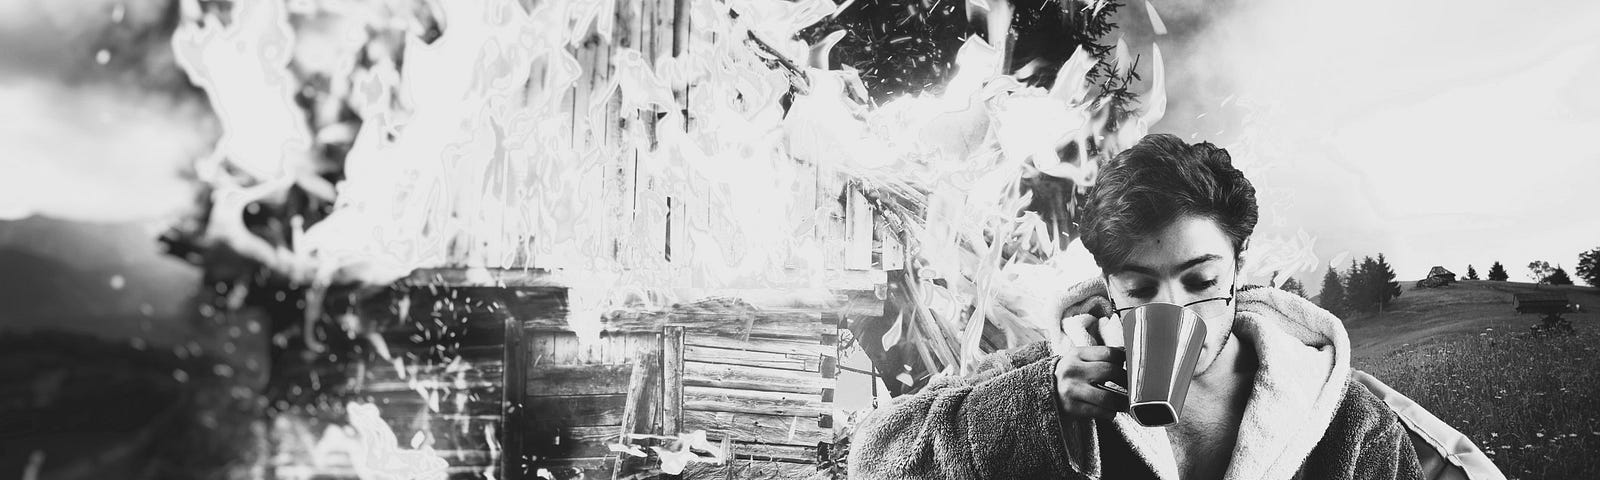 Image of a man sitting in a chair with a book and a cup of coffee looking very relaxed as a house is on fire directly behind him.